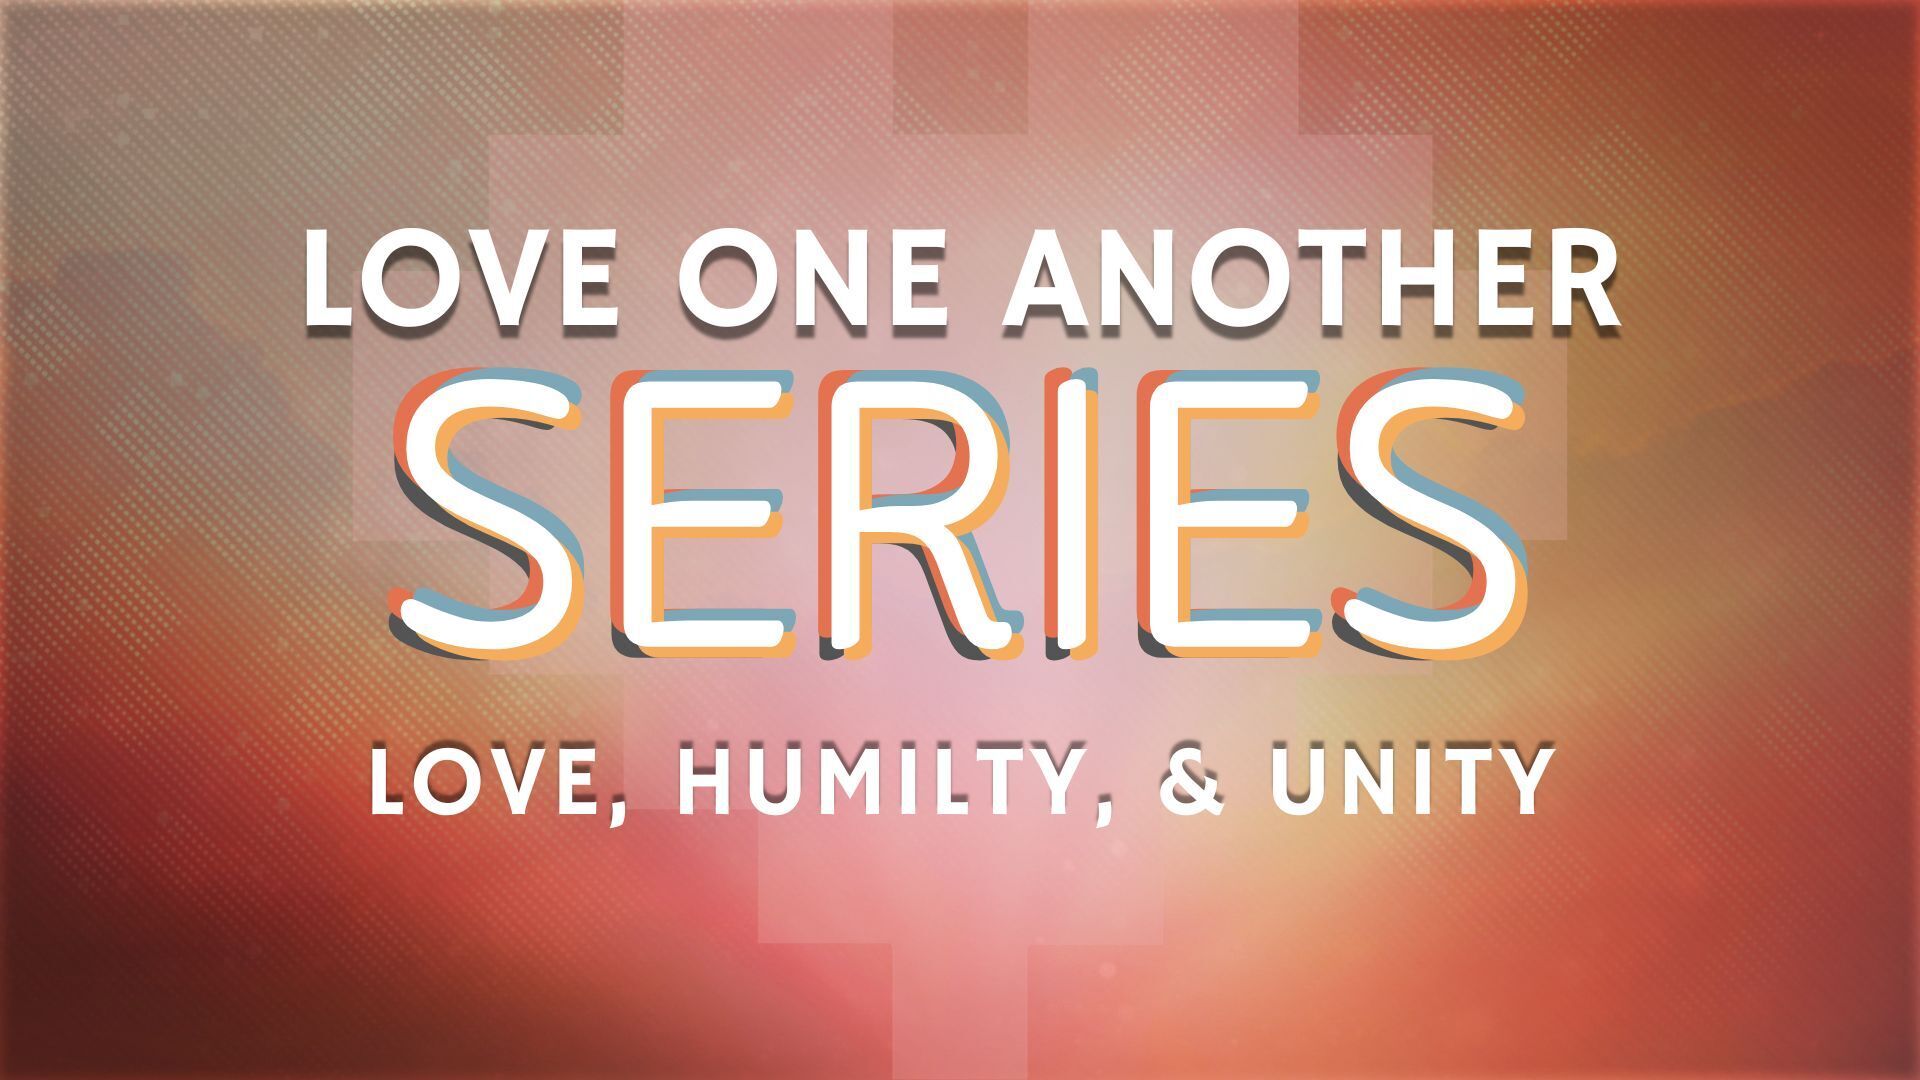 Love One Another Series - Love Humility and Unity